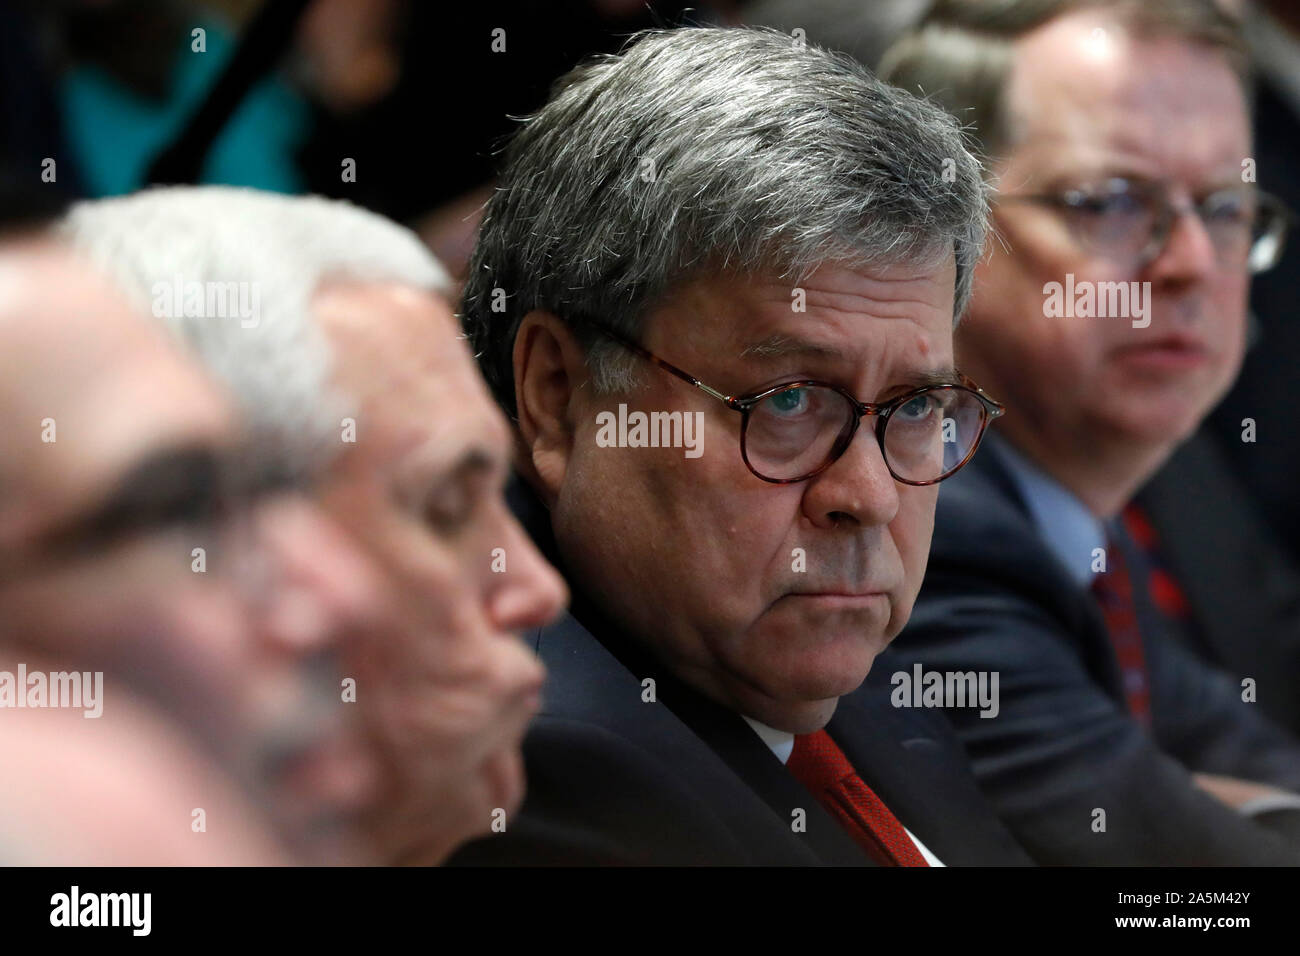 United States Attorney General William P. Barr attends a Cabinet Meeting at the White House in Washington, DC on October 21, 2019. Credit: Yuri Gripas/Pool via CNP /MediaPunch Stock Photo